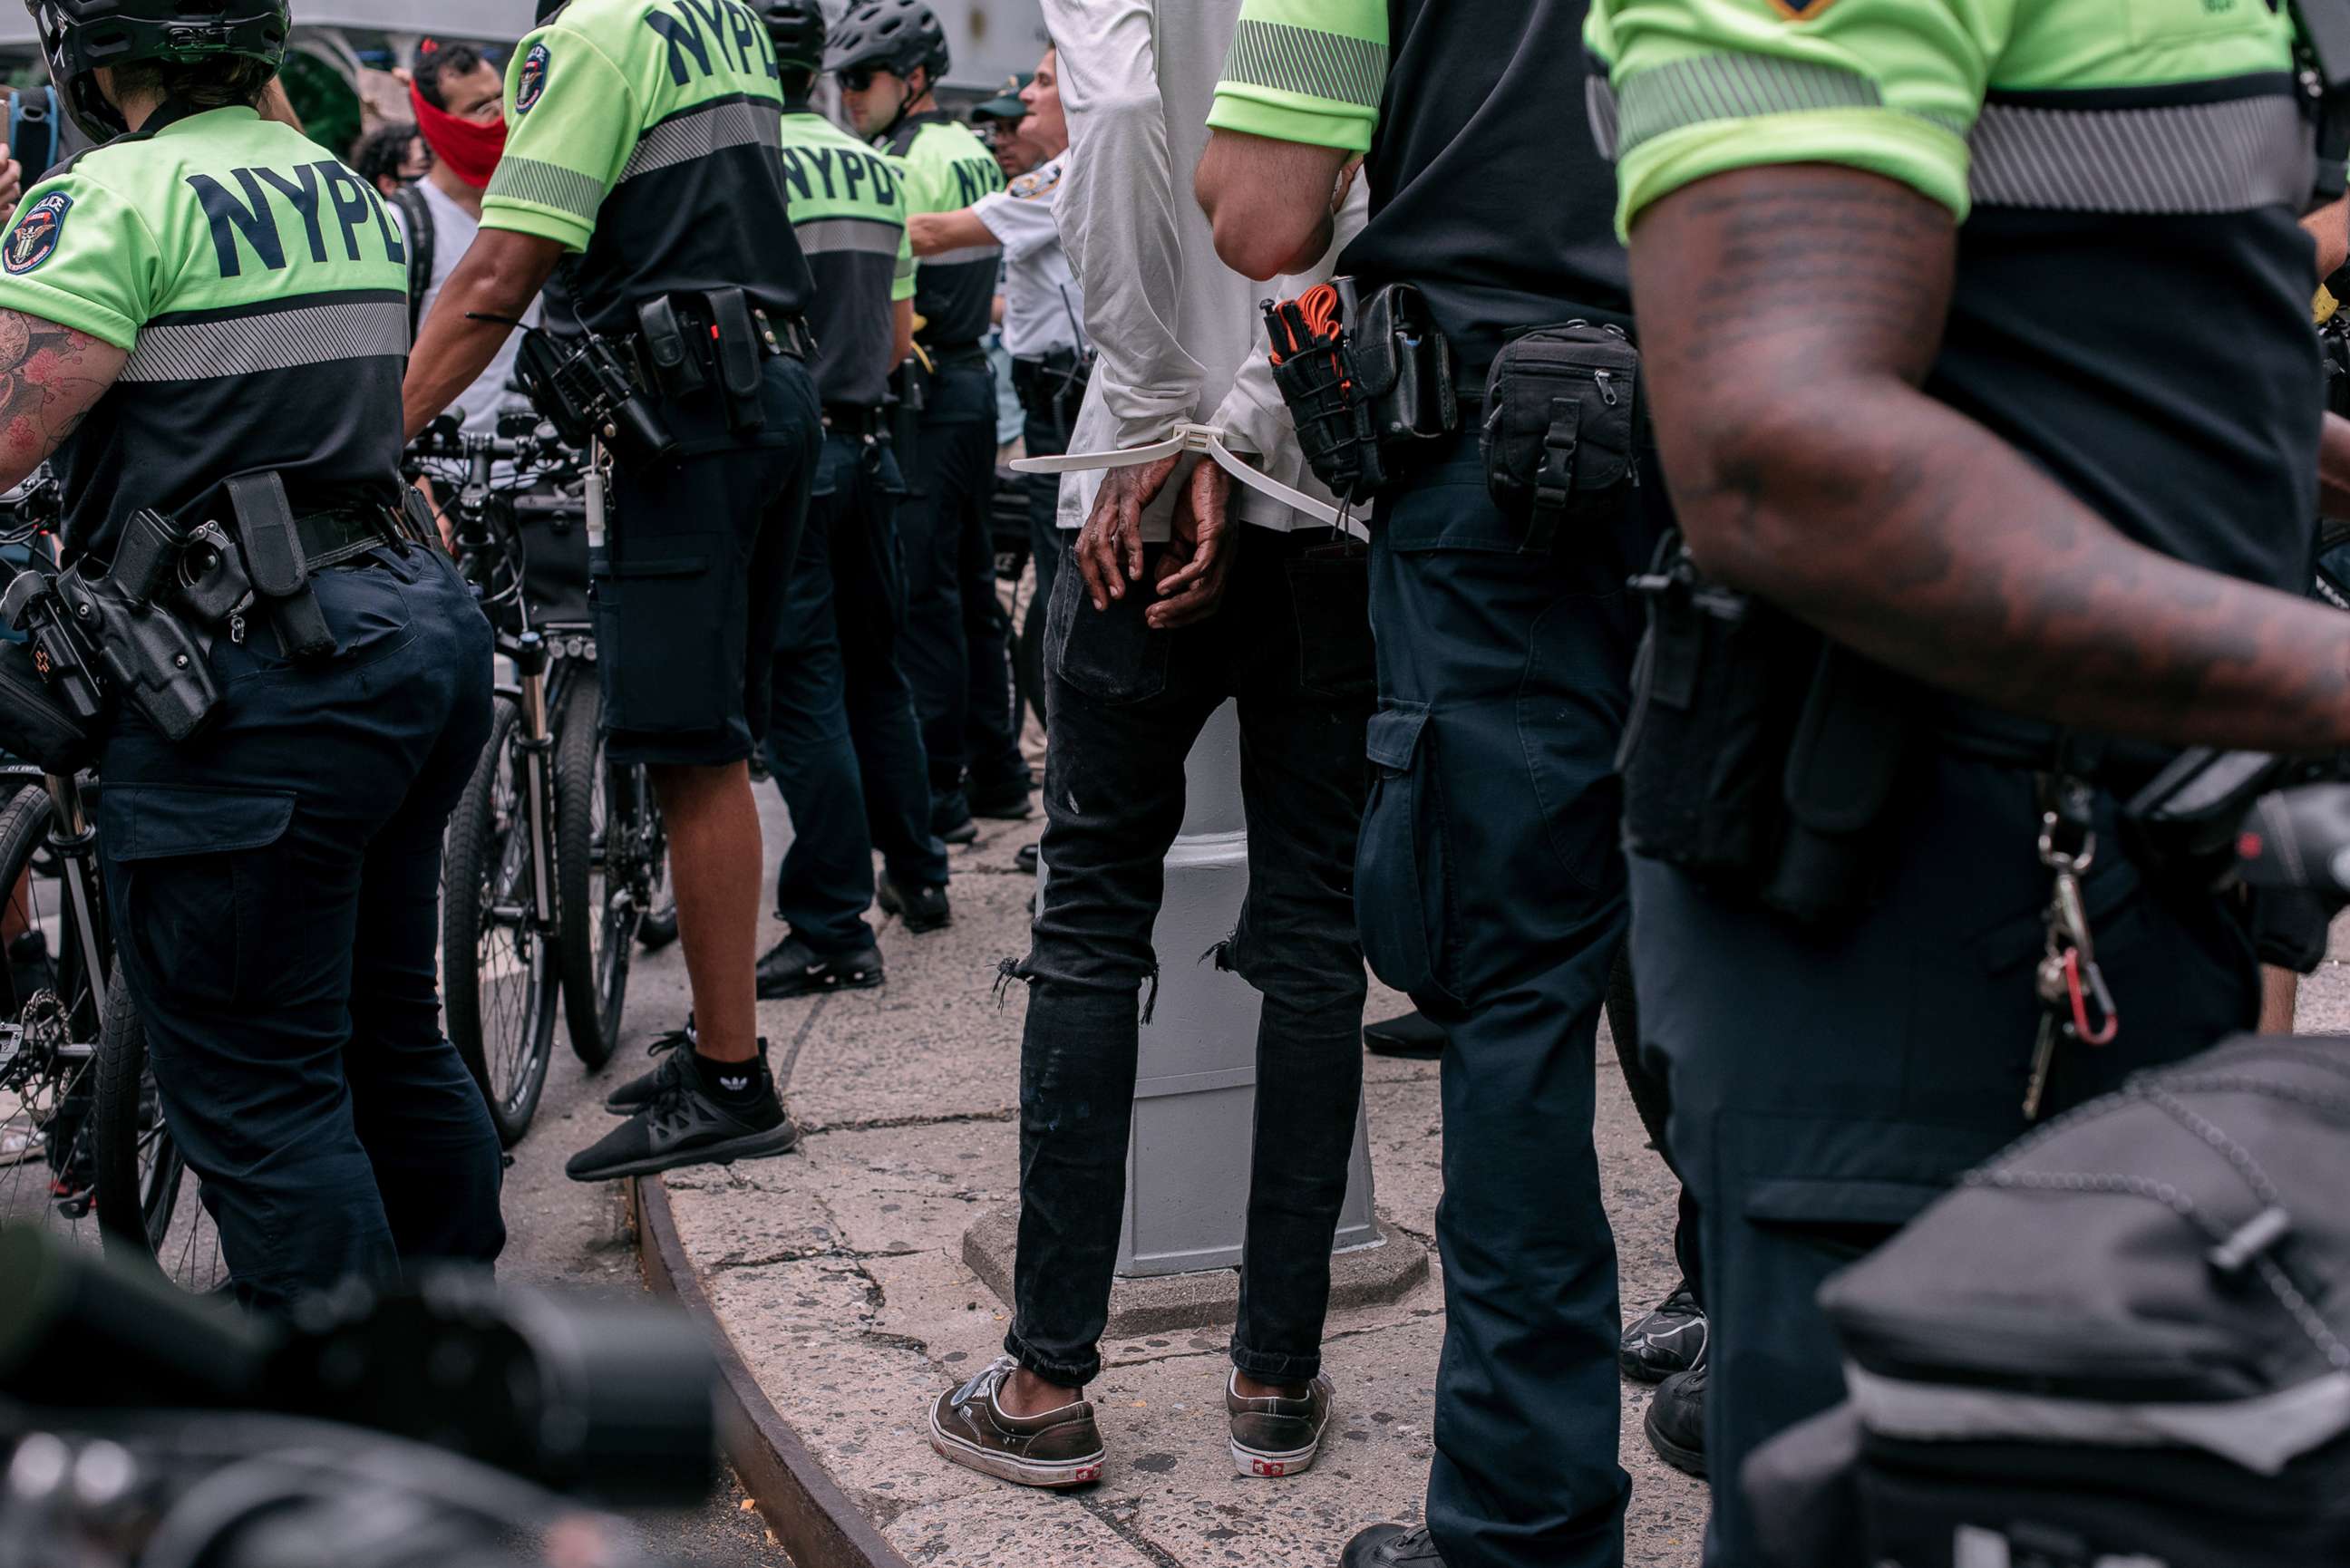 PHOTO: A protester is arrested by NYPD officers during a march against police brutality on June 11, 2020, in New York.